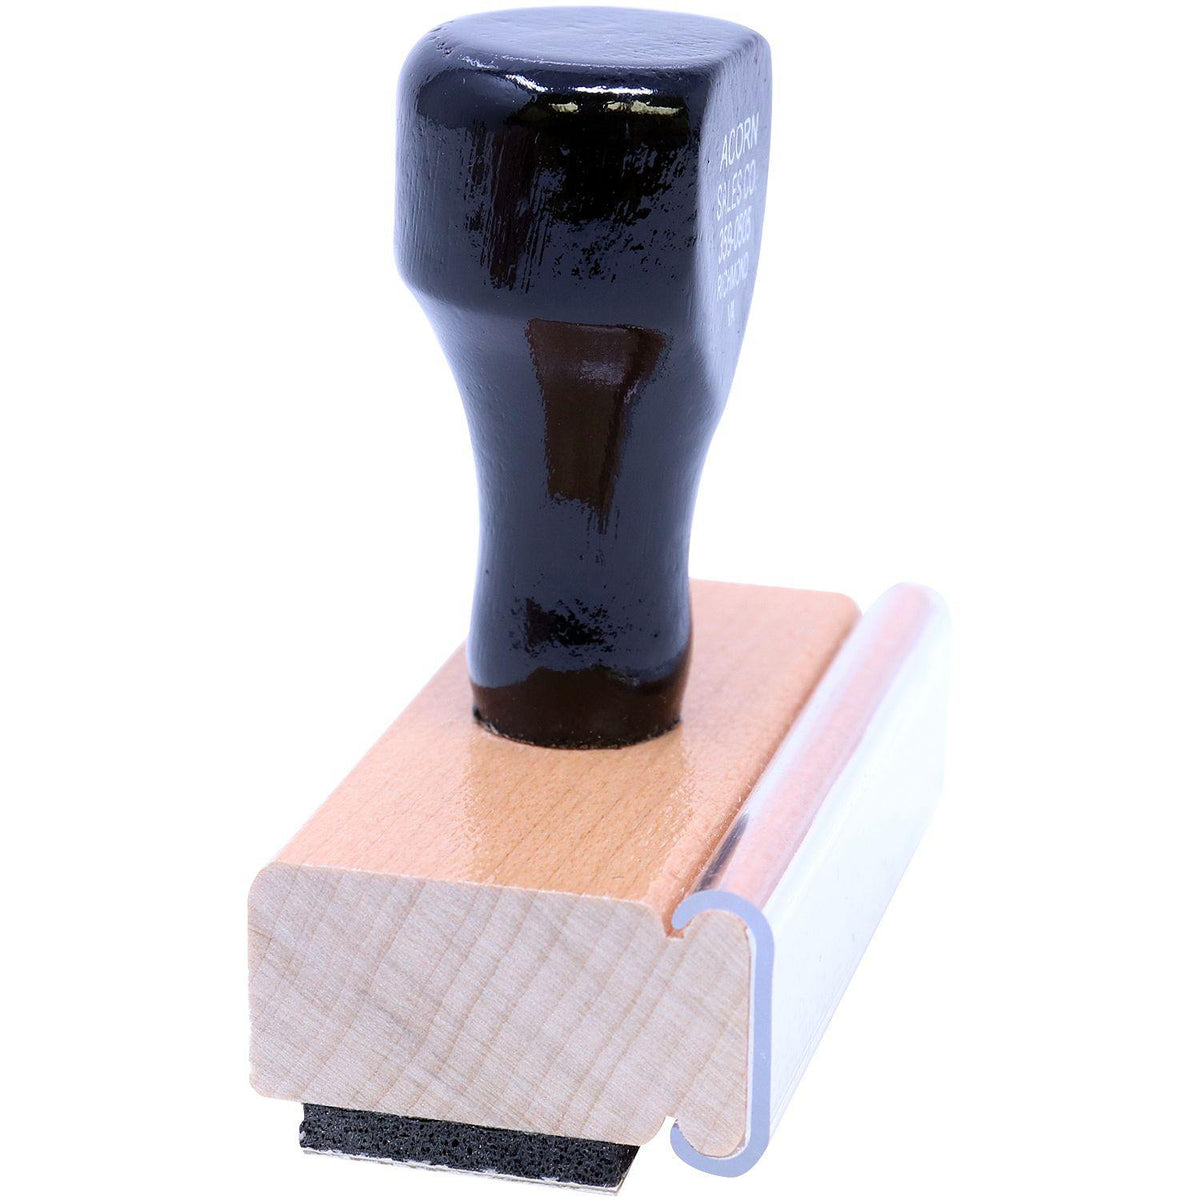 Refused Rubber Stamp - Engineer Seal Stamps - Brand_Acorn, Impression Size_Small, Stamp Type_Regular Stamp, Type of Use_General, Type of Use_Office, Type of Use_Postal &amp; Mailing